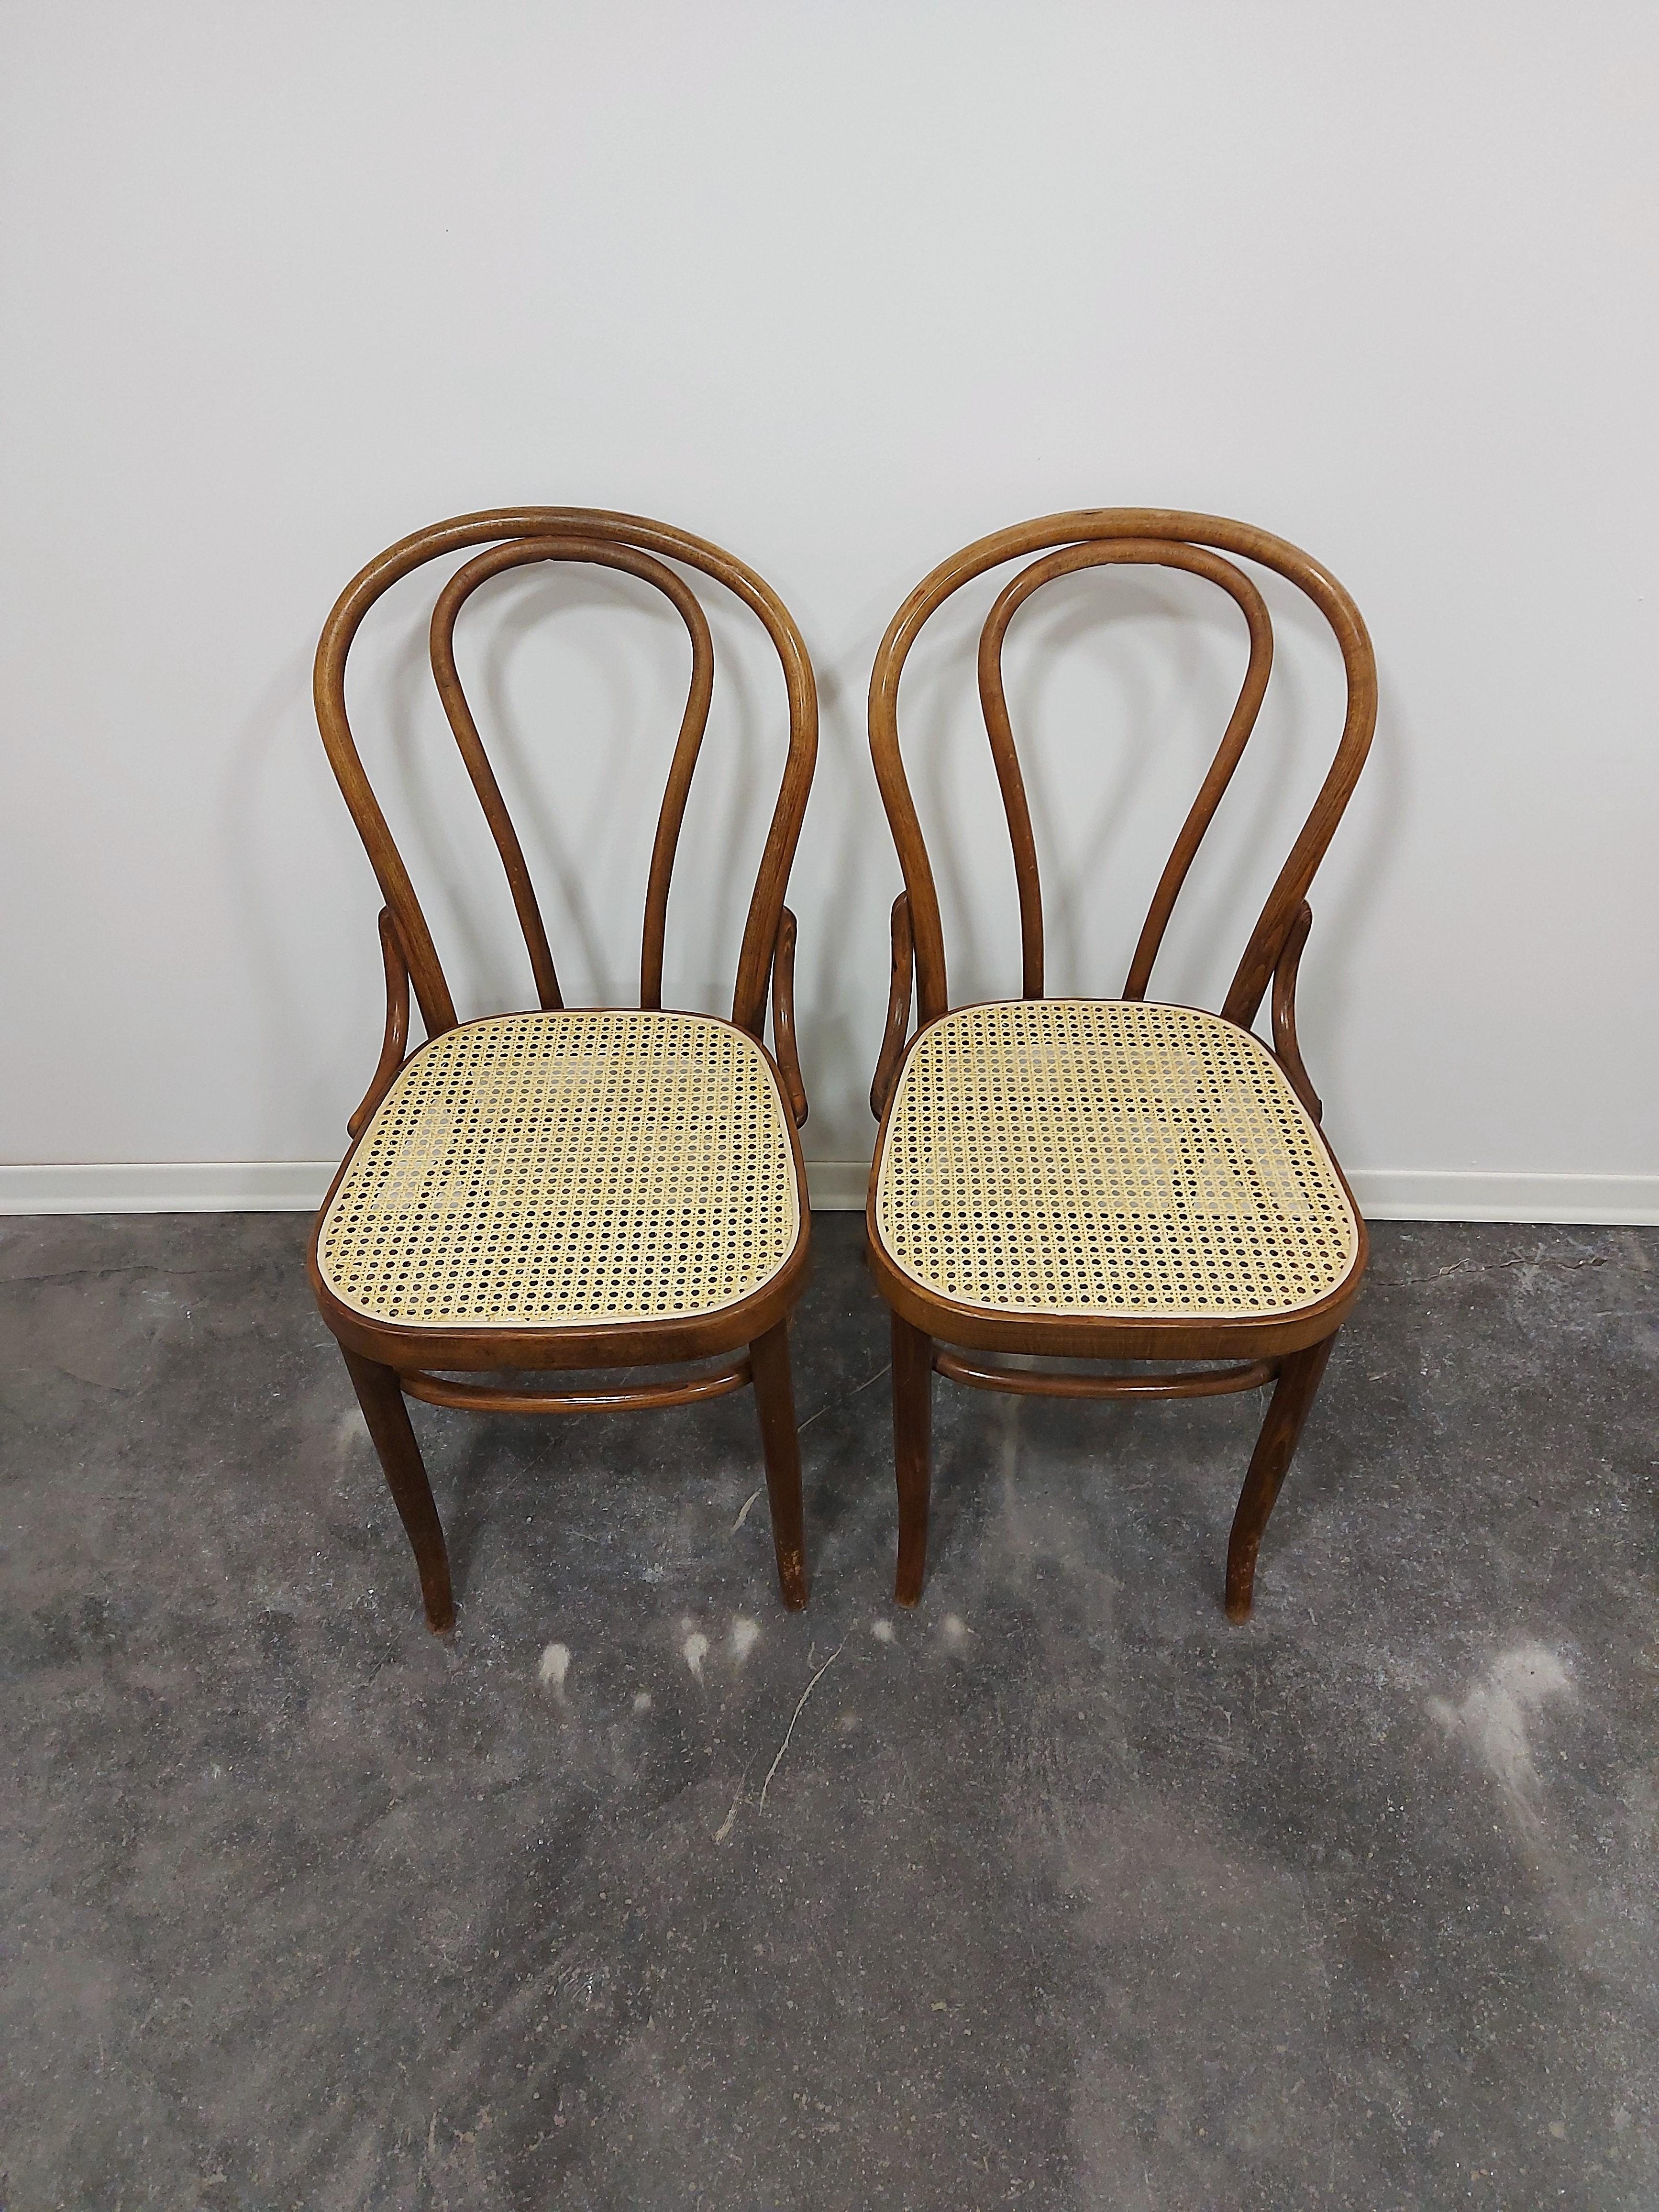 Mid-20th Century Chair, Bentwood 1960s, 1 of 3 For Sale